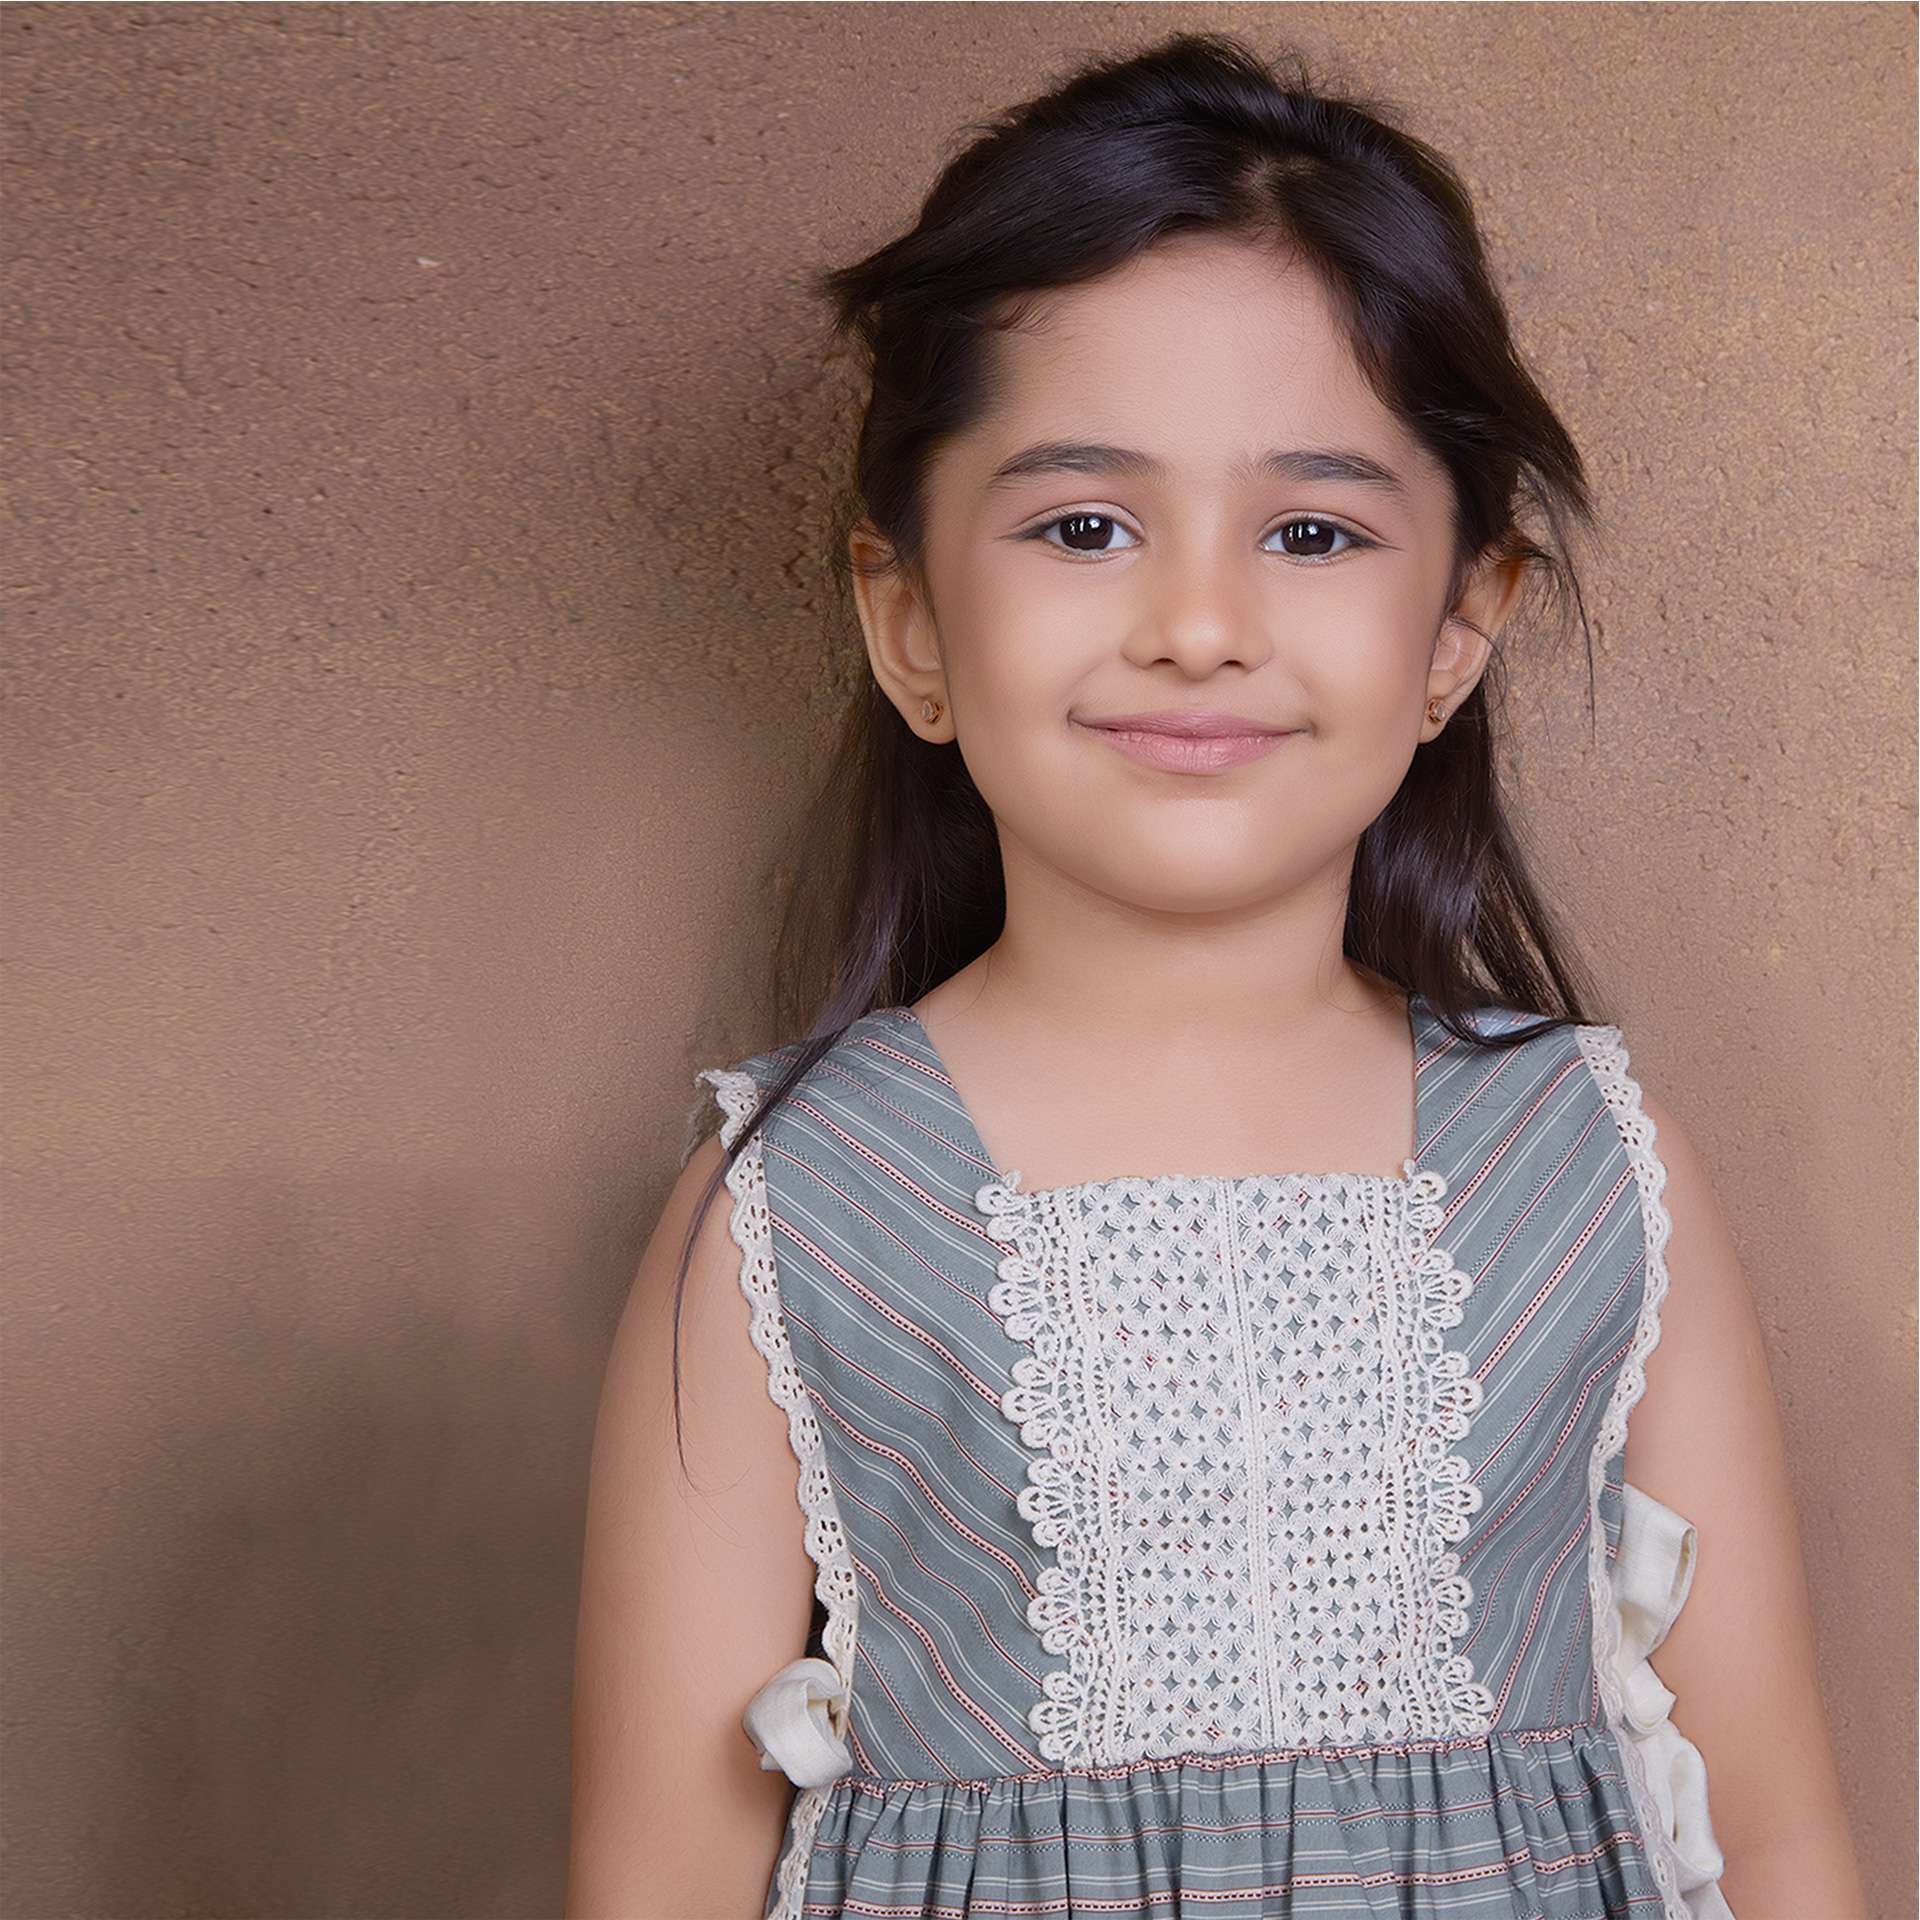 A young girl showcasing striped sleeveless dress with charming side bows and delicate lace trims